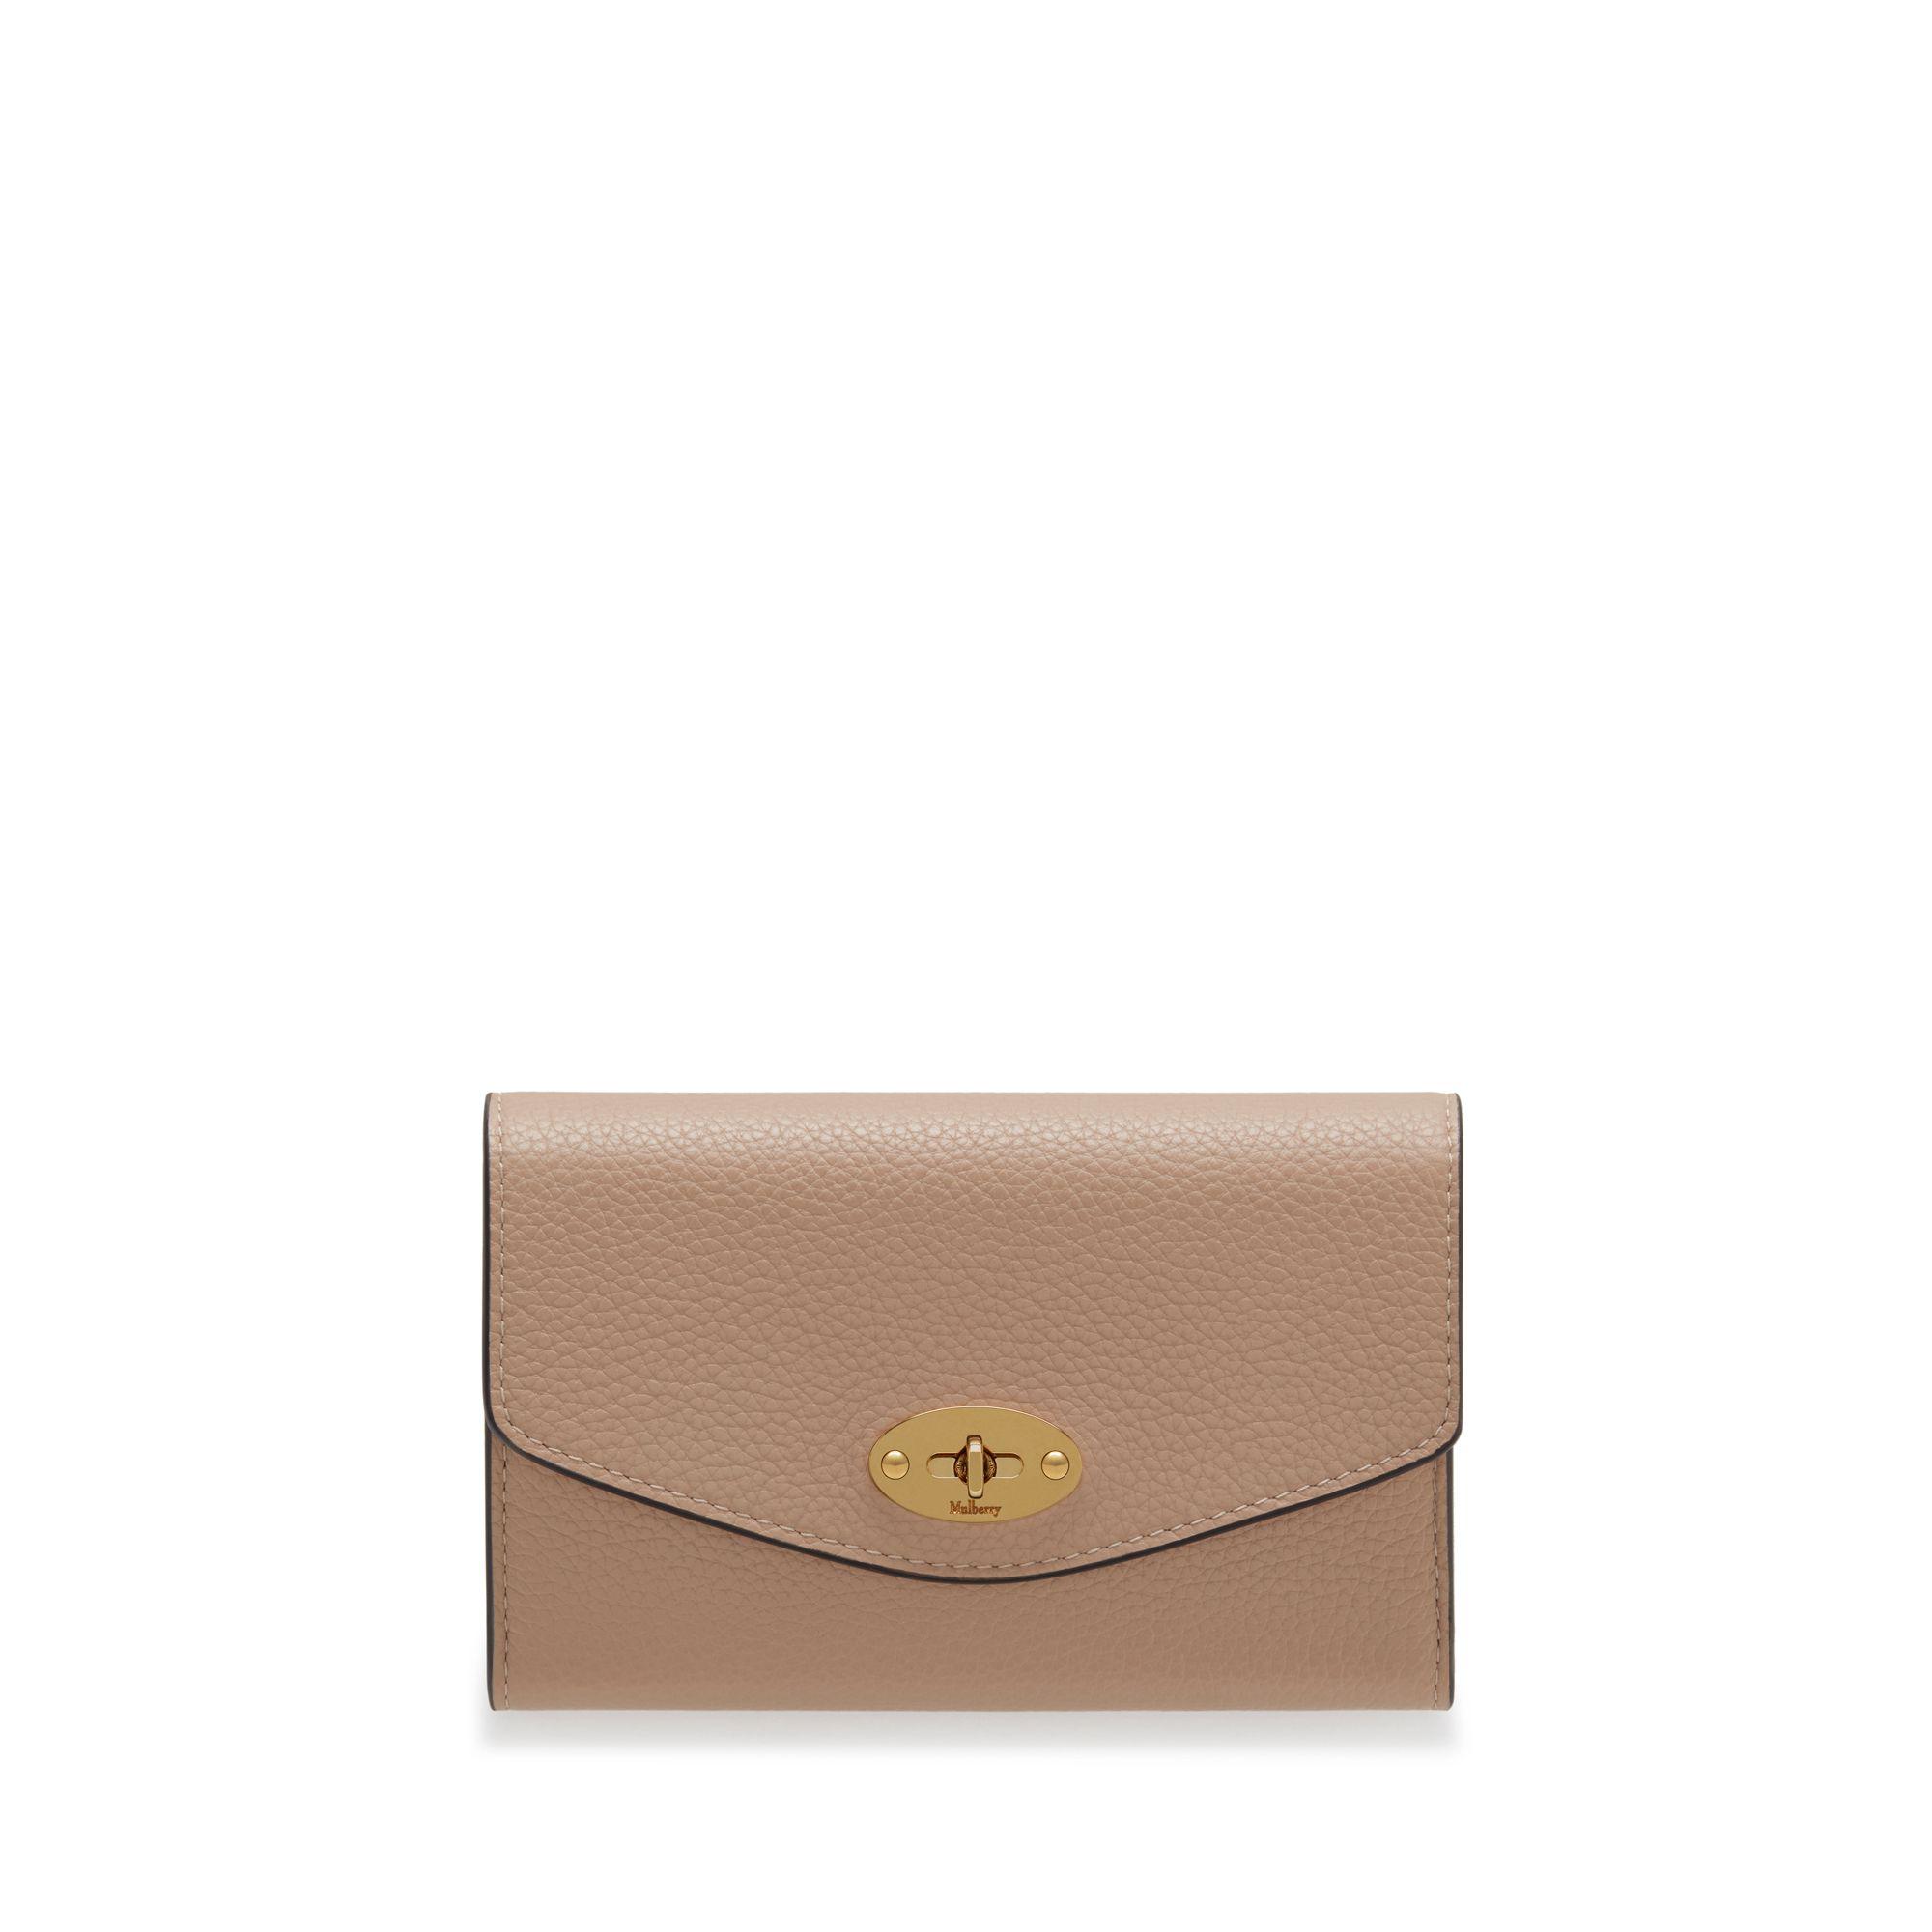 Mulberry Small Darley In Rosewater Small Classic Grain | Lyst Australia